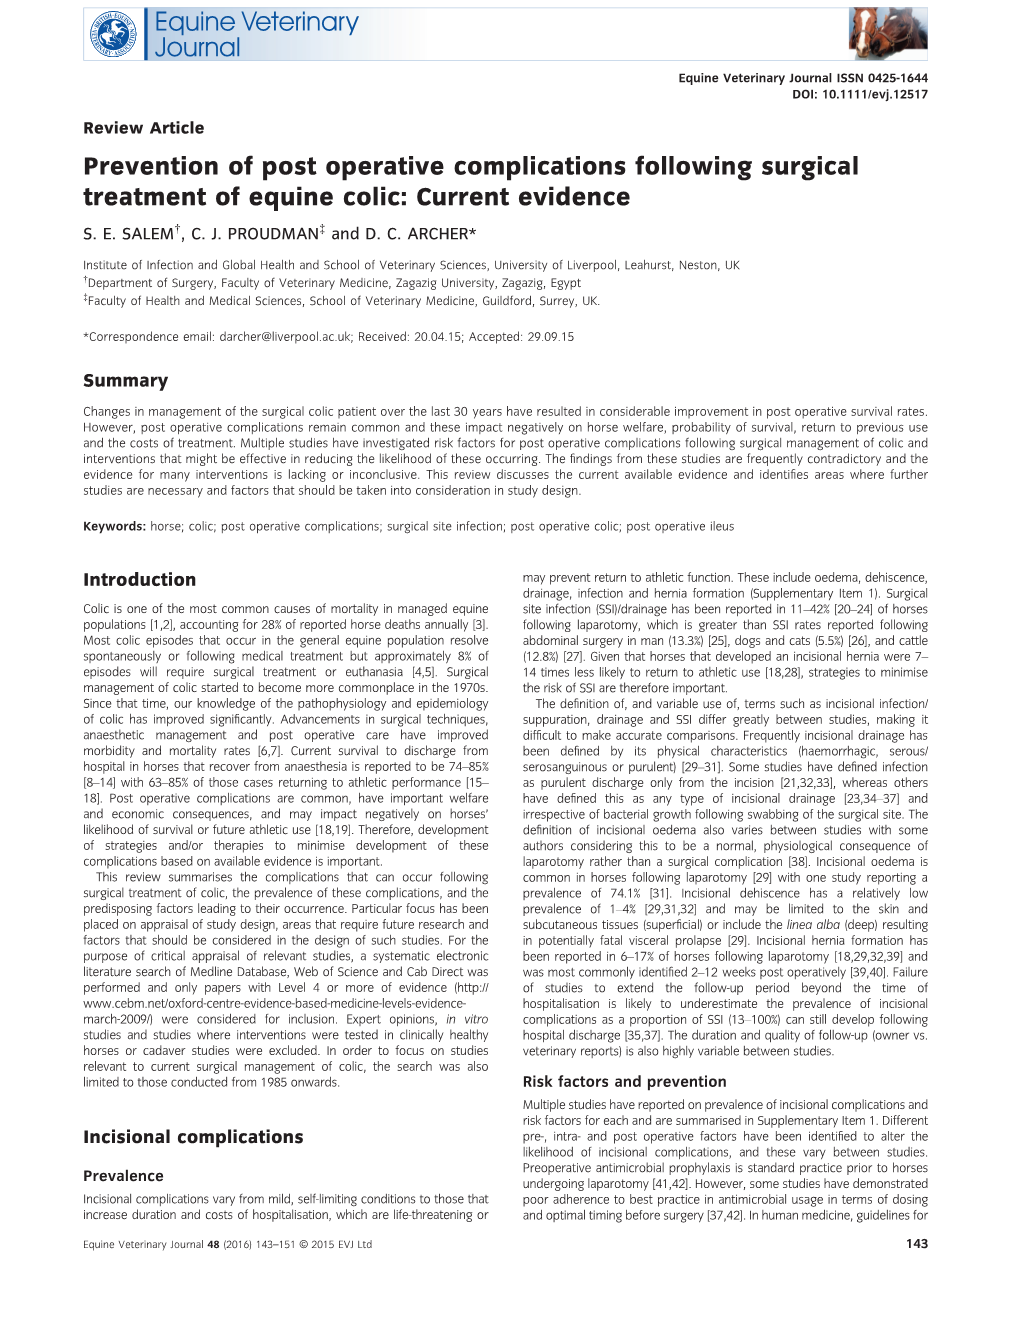 Prevention of Post Operative Complications Following Surgical Treatment of Equine Colic: Current Evidence † ‡ S